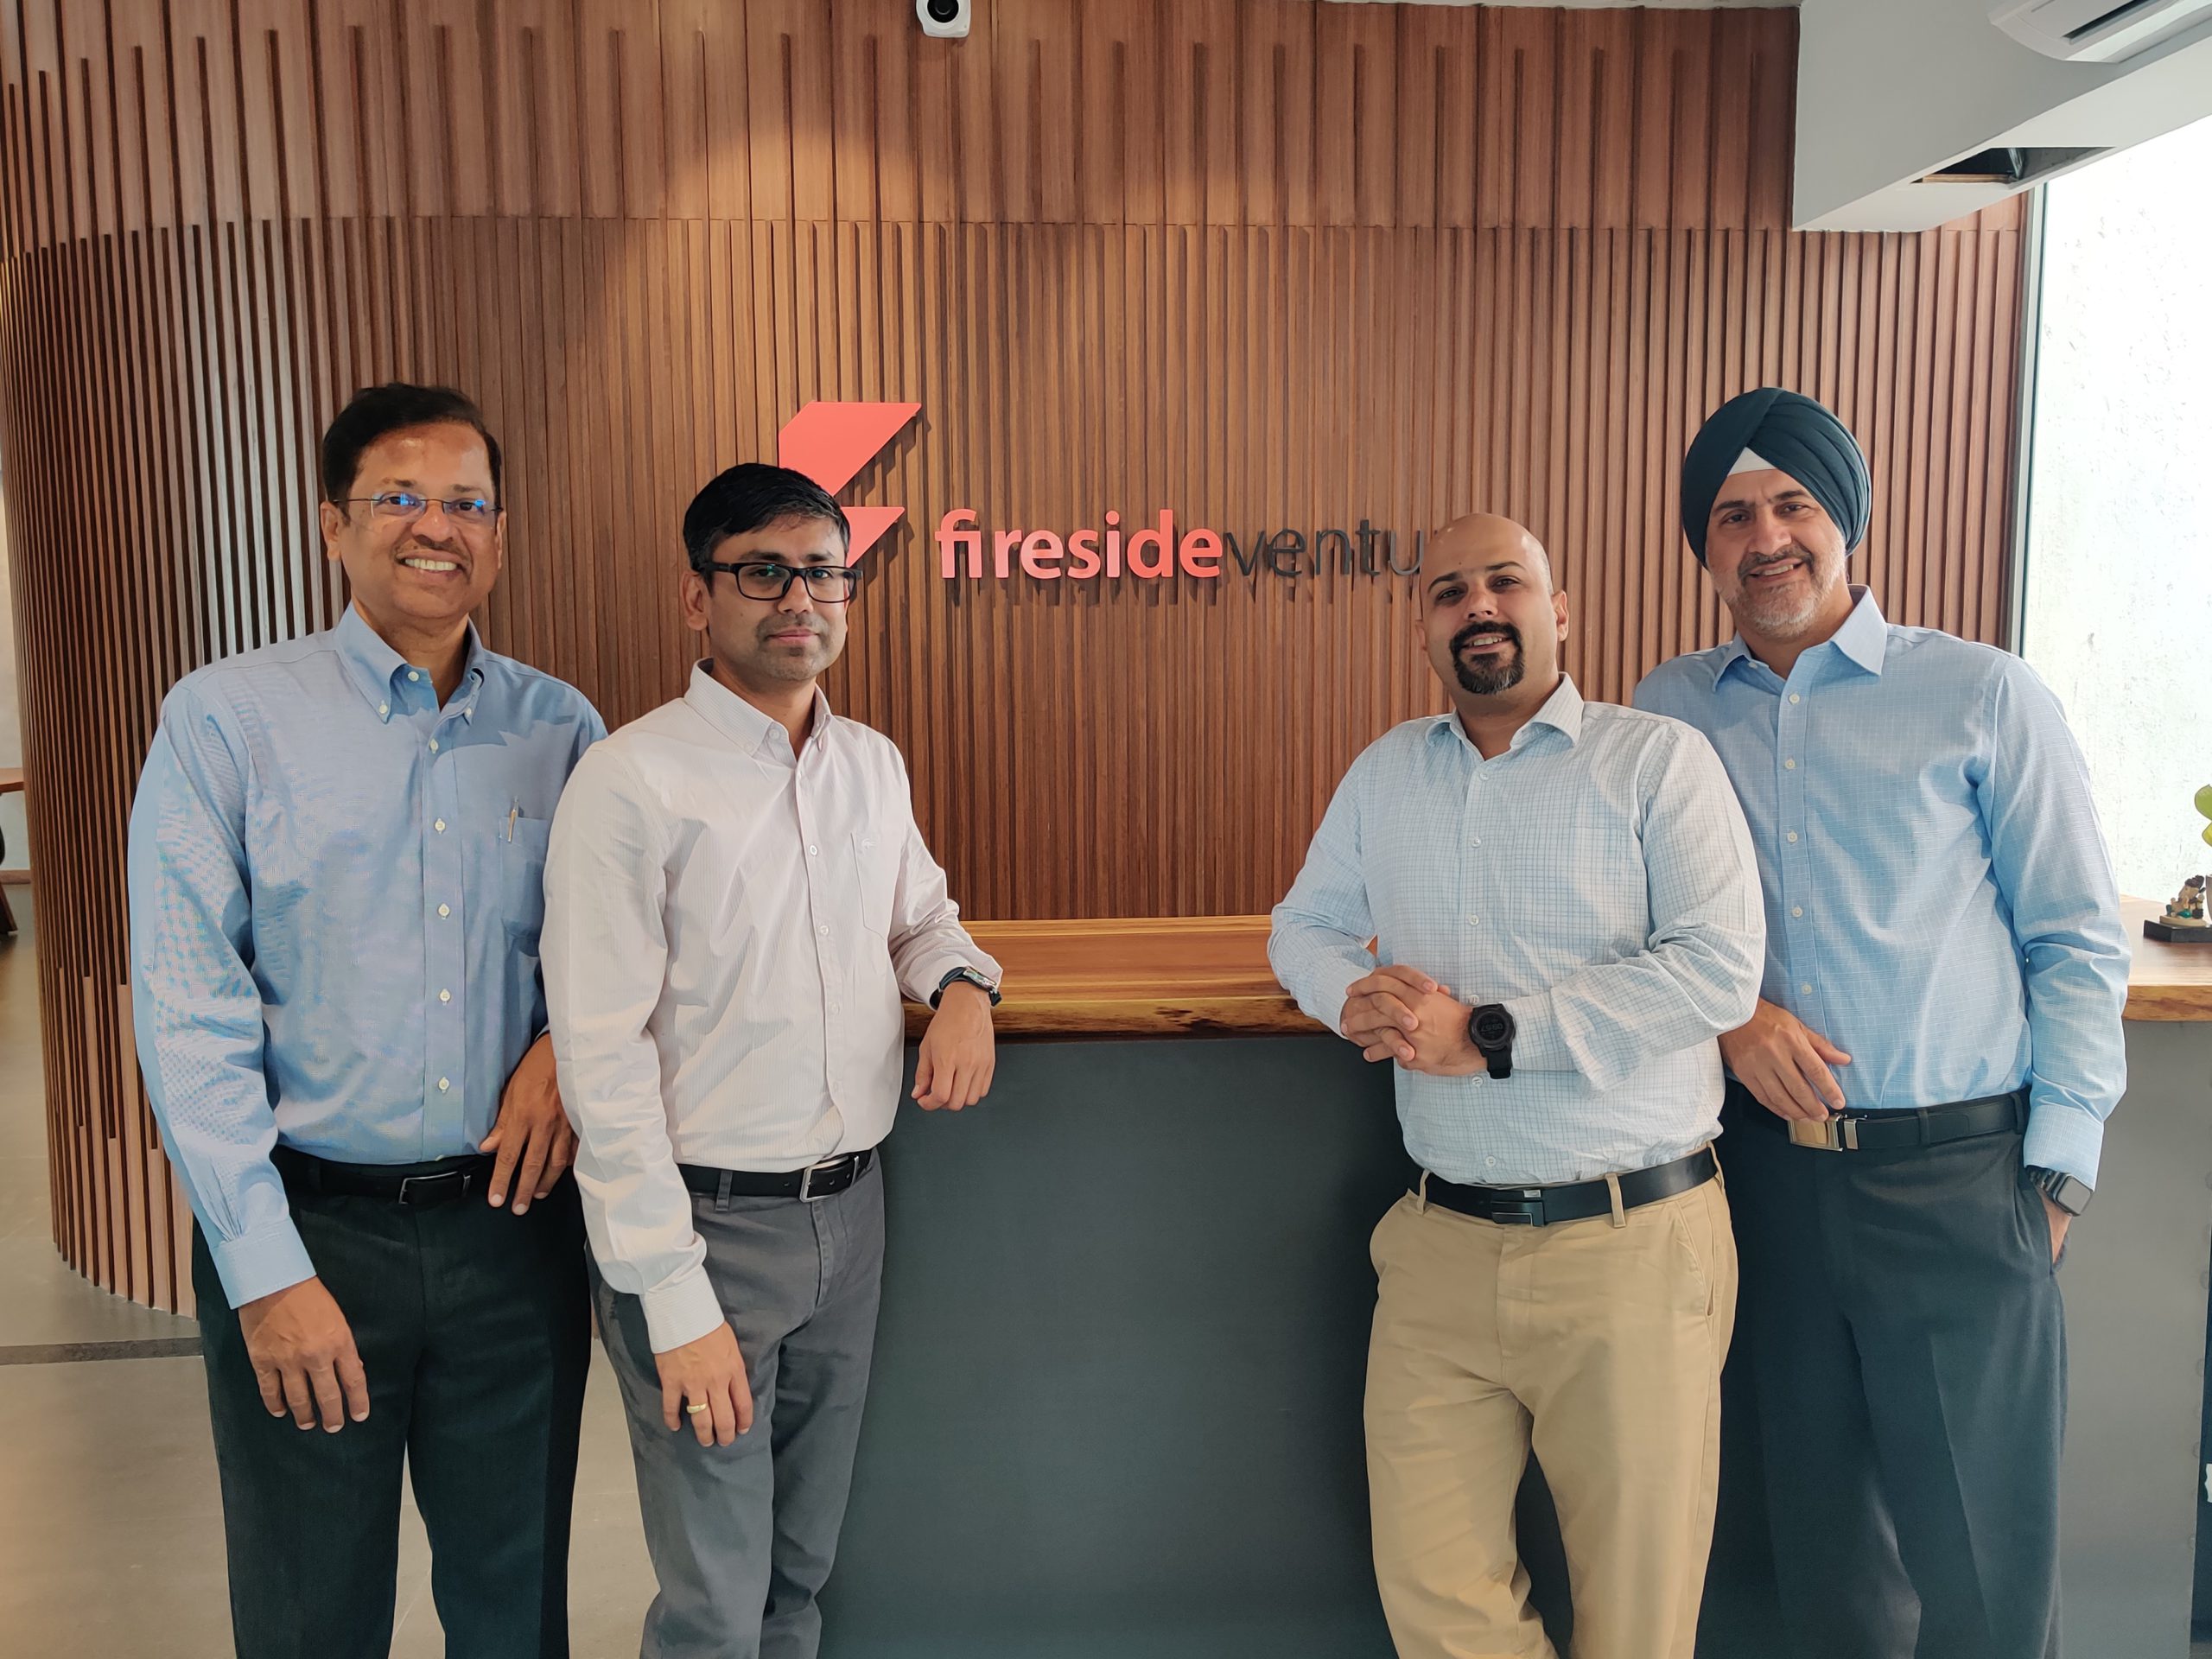 Consumer brand focused VC Fireside Ventures closes its second fund at USD 118 million